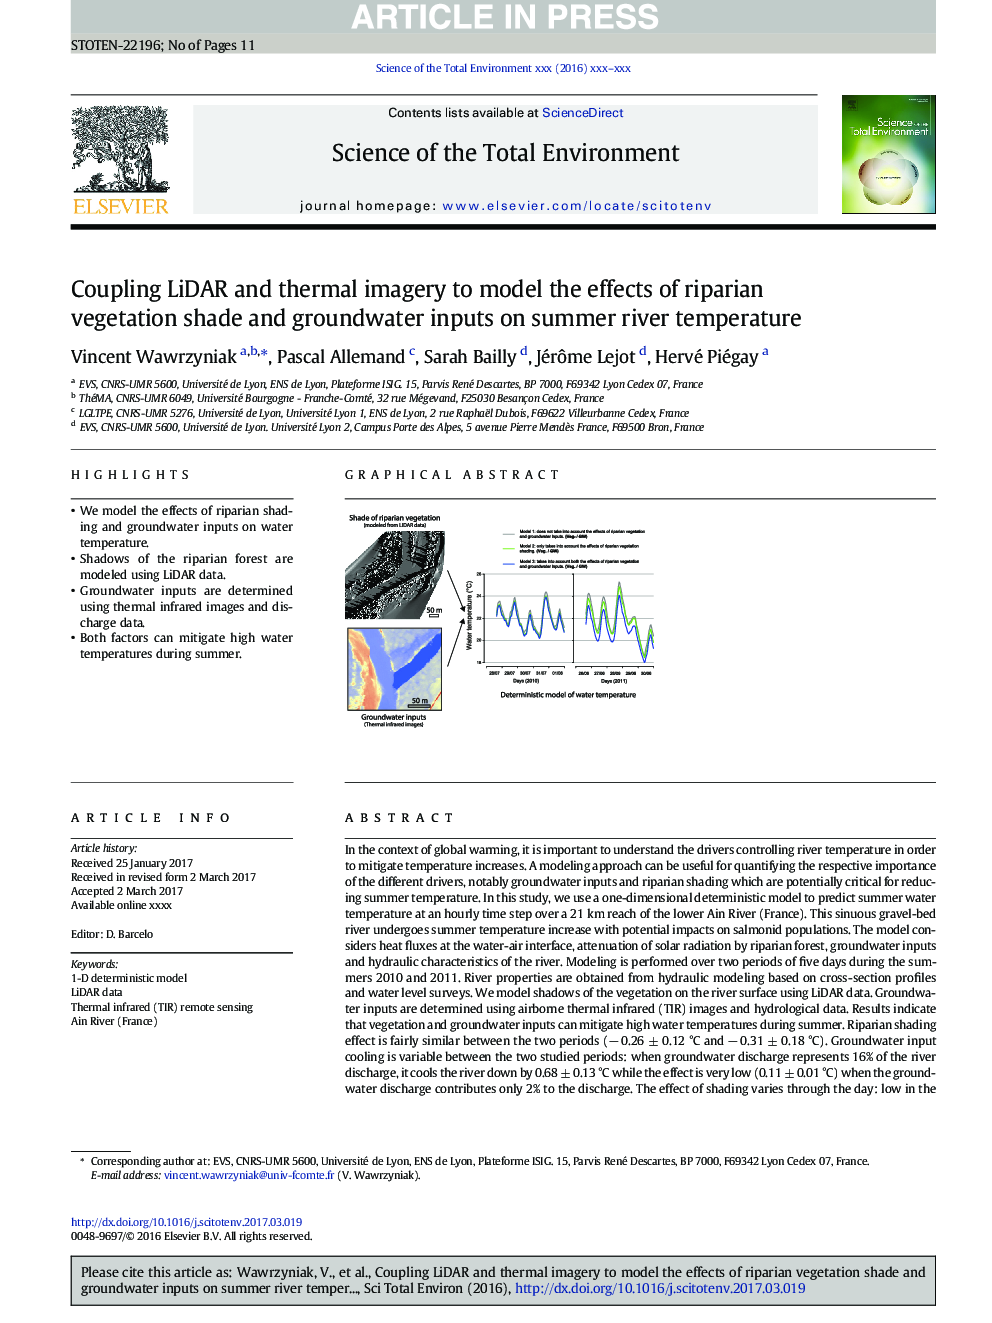 Coupling LiDAR and thermal imagery to model the effects of riparian vegetation shade and groundwater inputs on summer river temperature